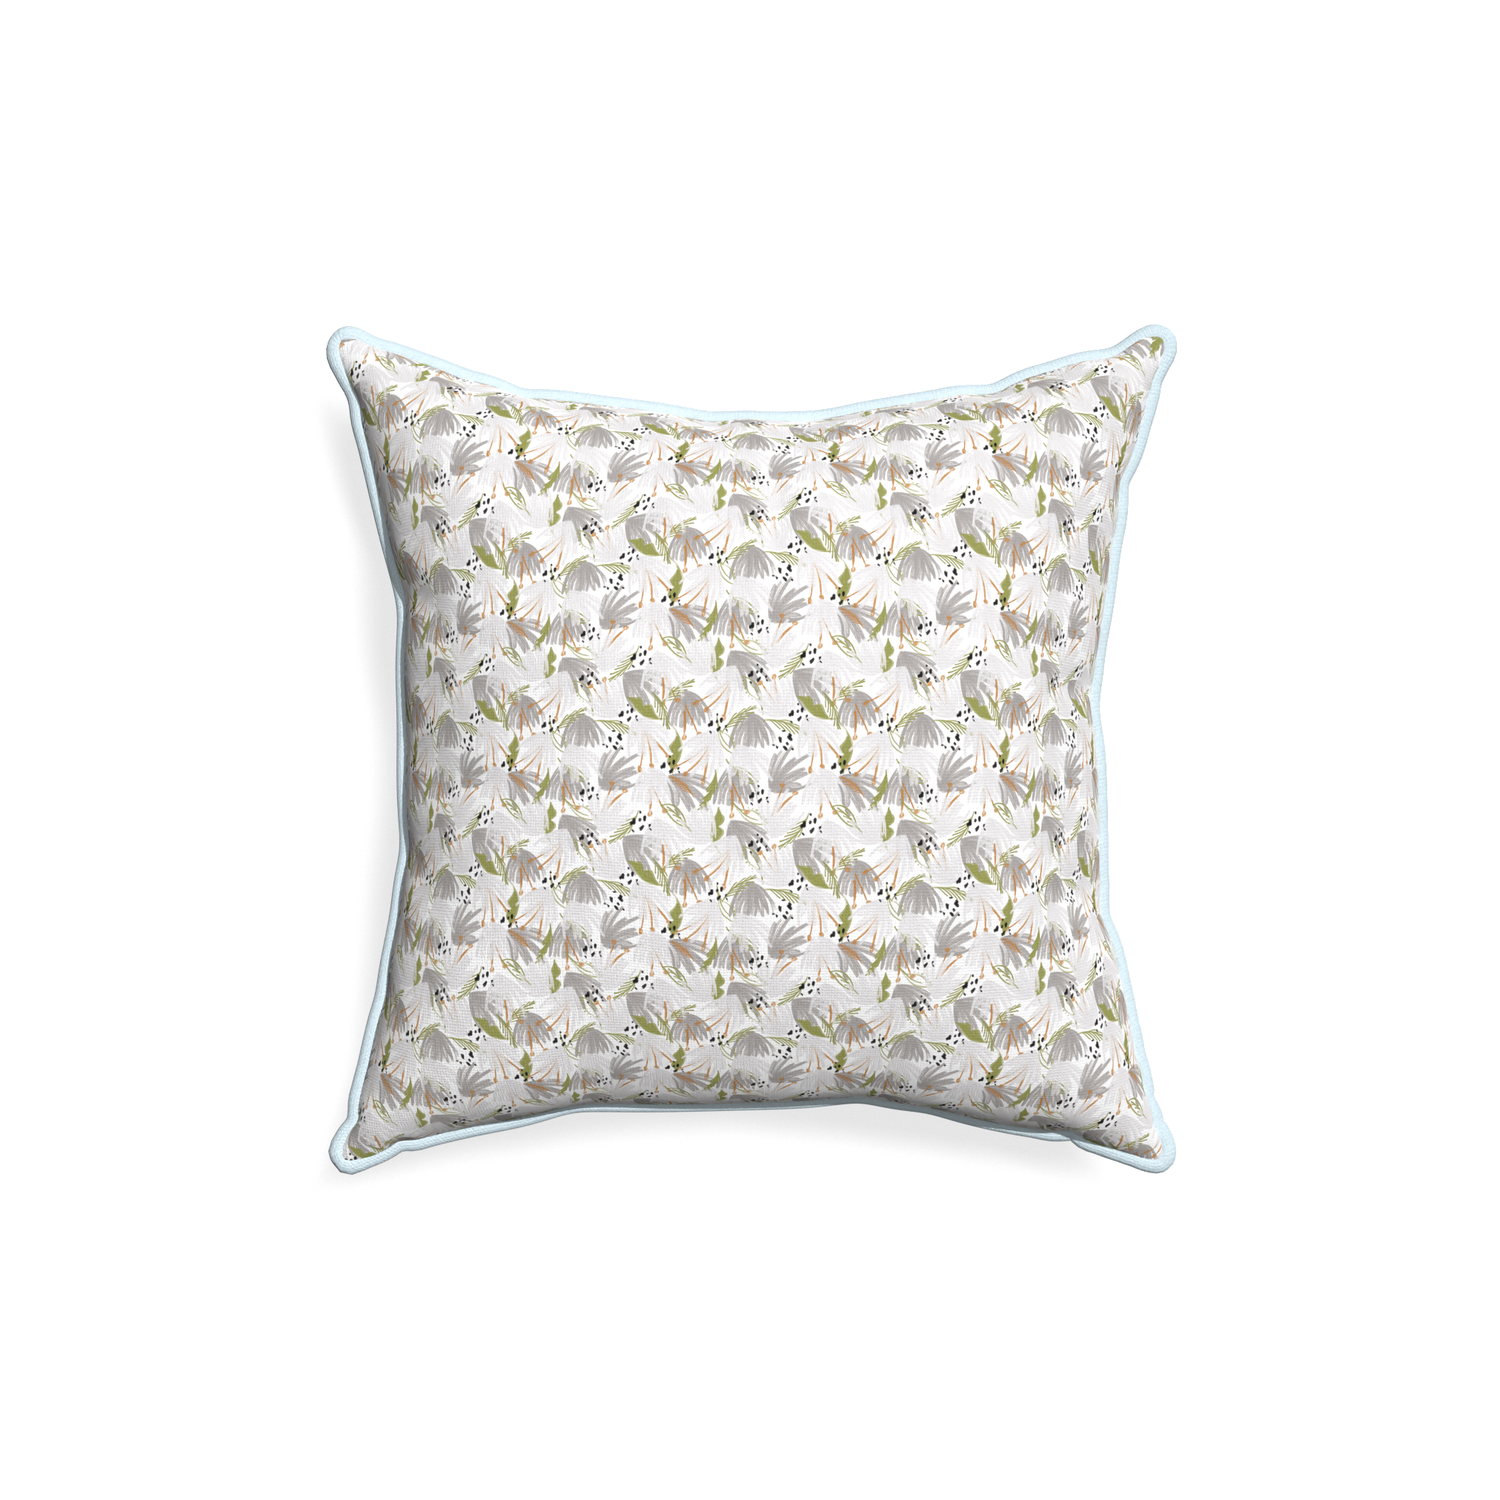 18-square eden grey custom grey floralpillow with powder piping on white background